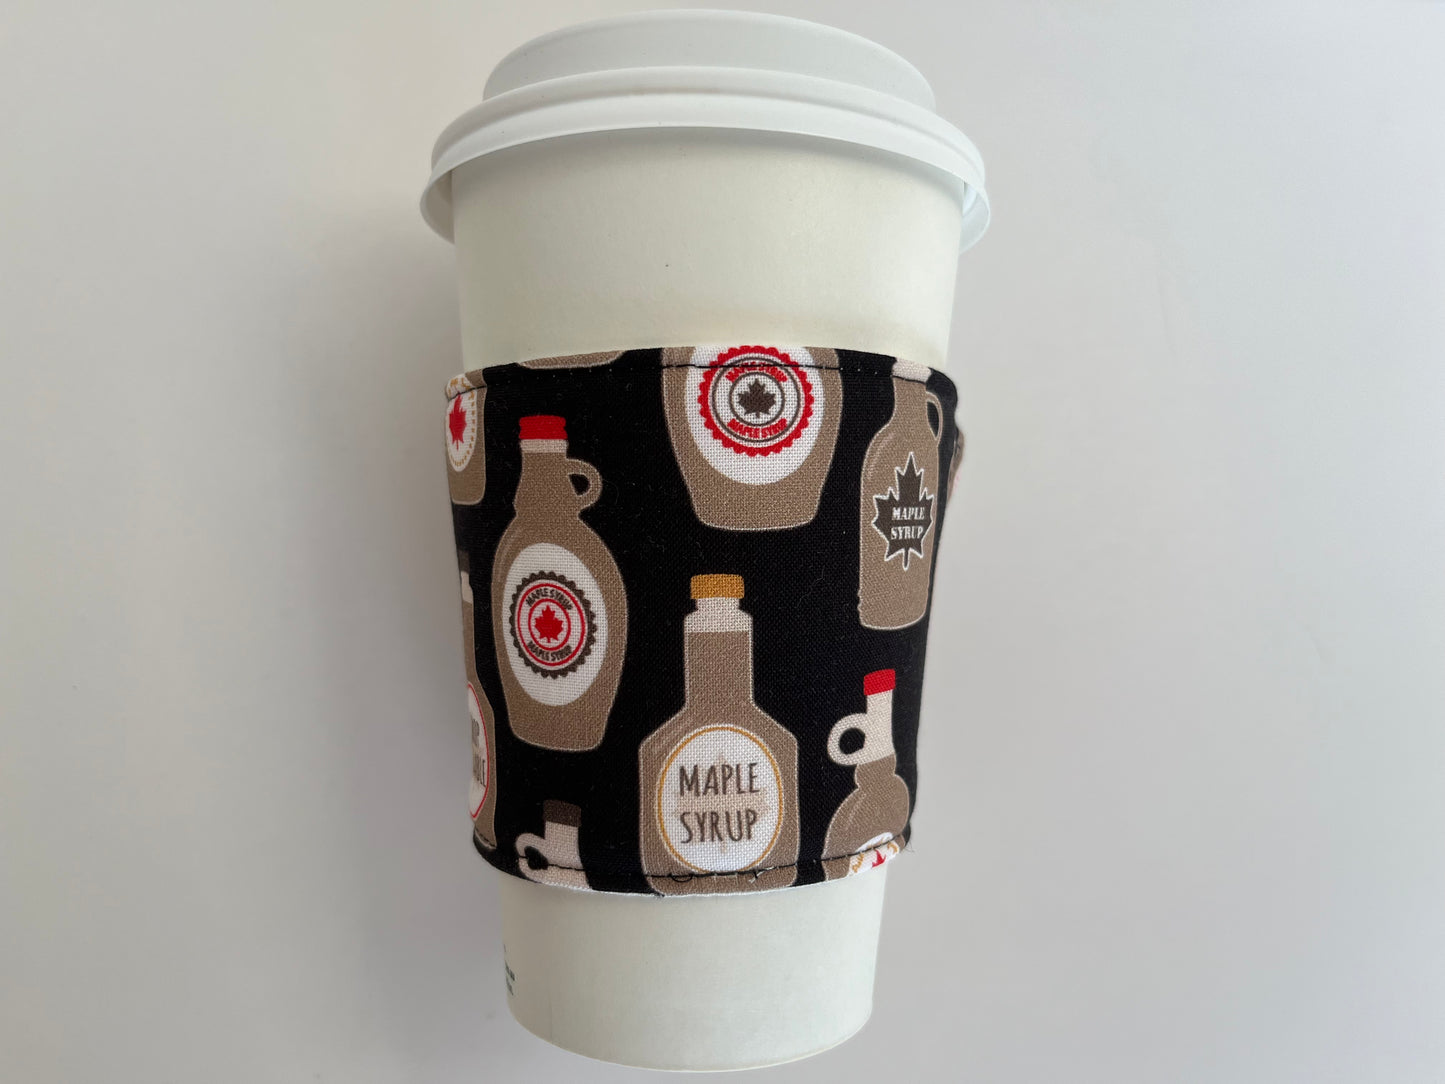 Maple Syrup Canadian Themed Coffee Cup Cozy, fabric coffee sleeve